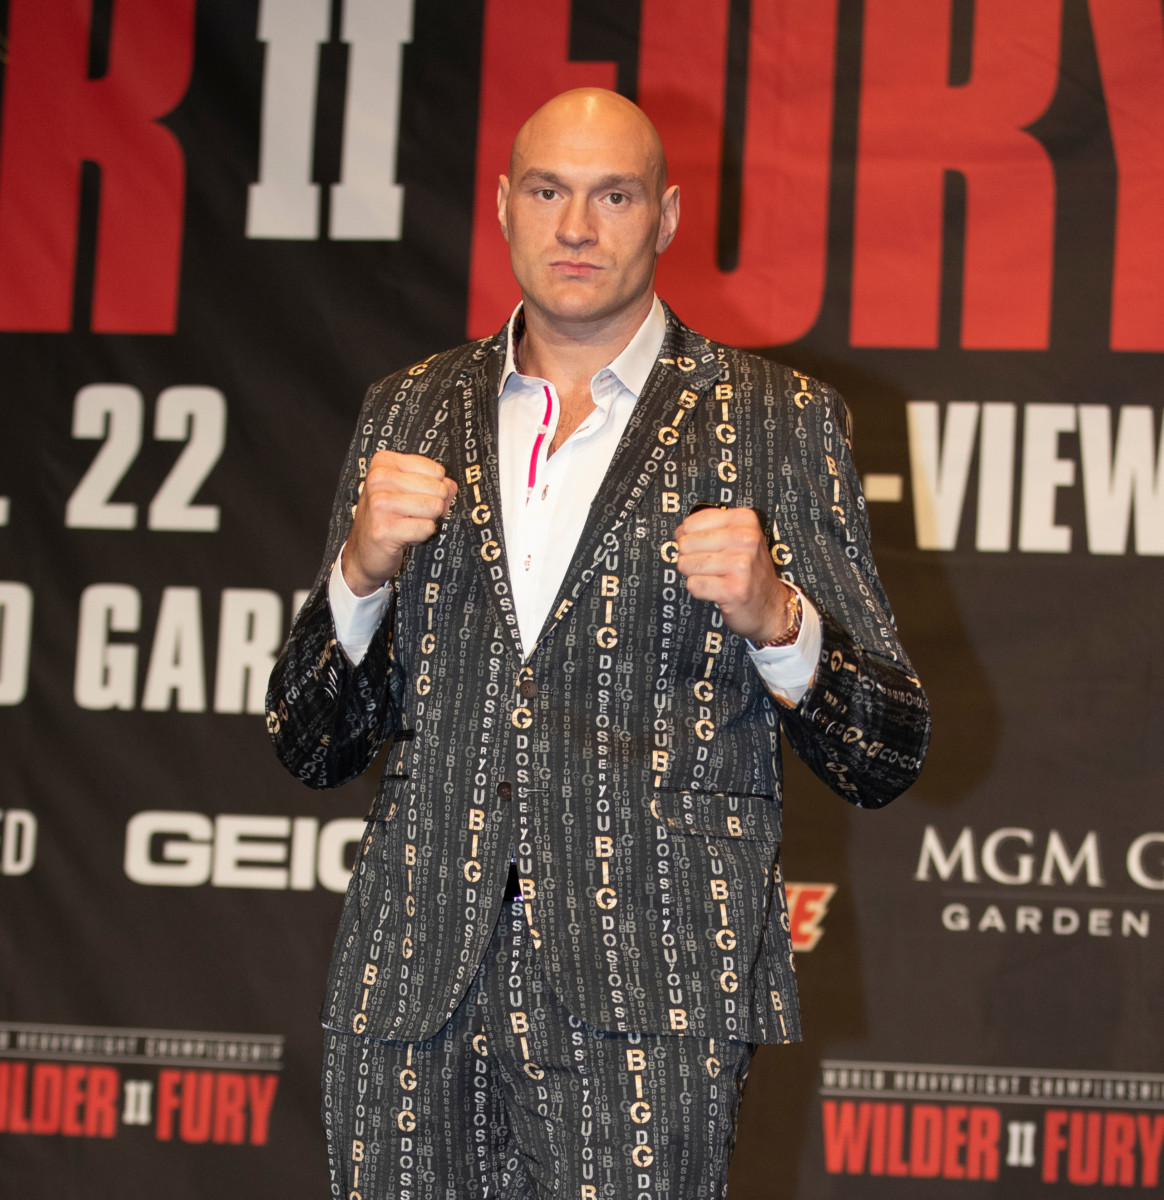 Tyson Fury has trademarked his favourite insult 'You Big Dosser' which can be seen printed on his suit